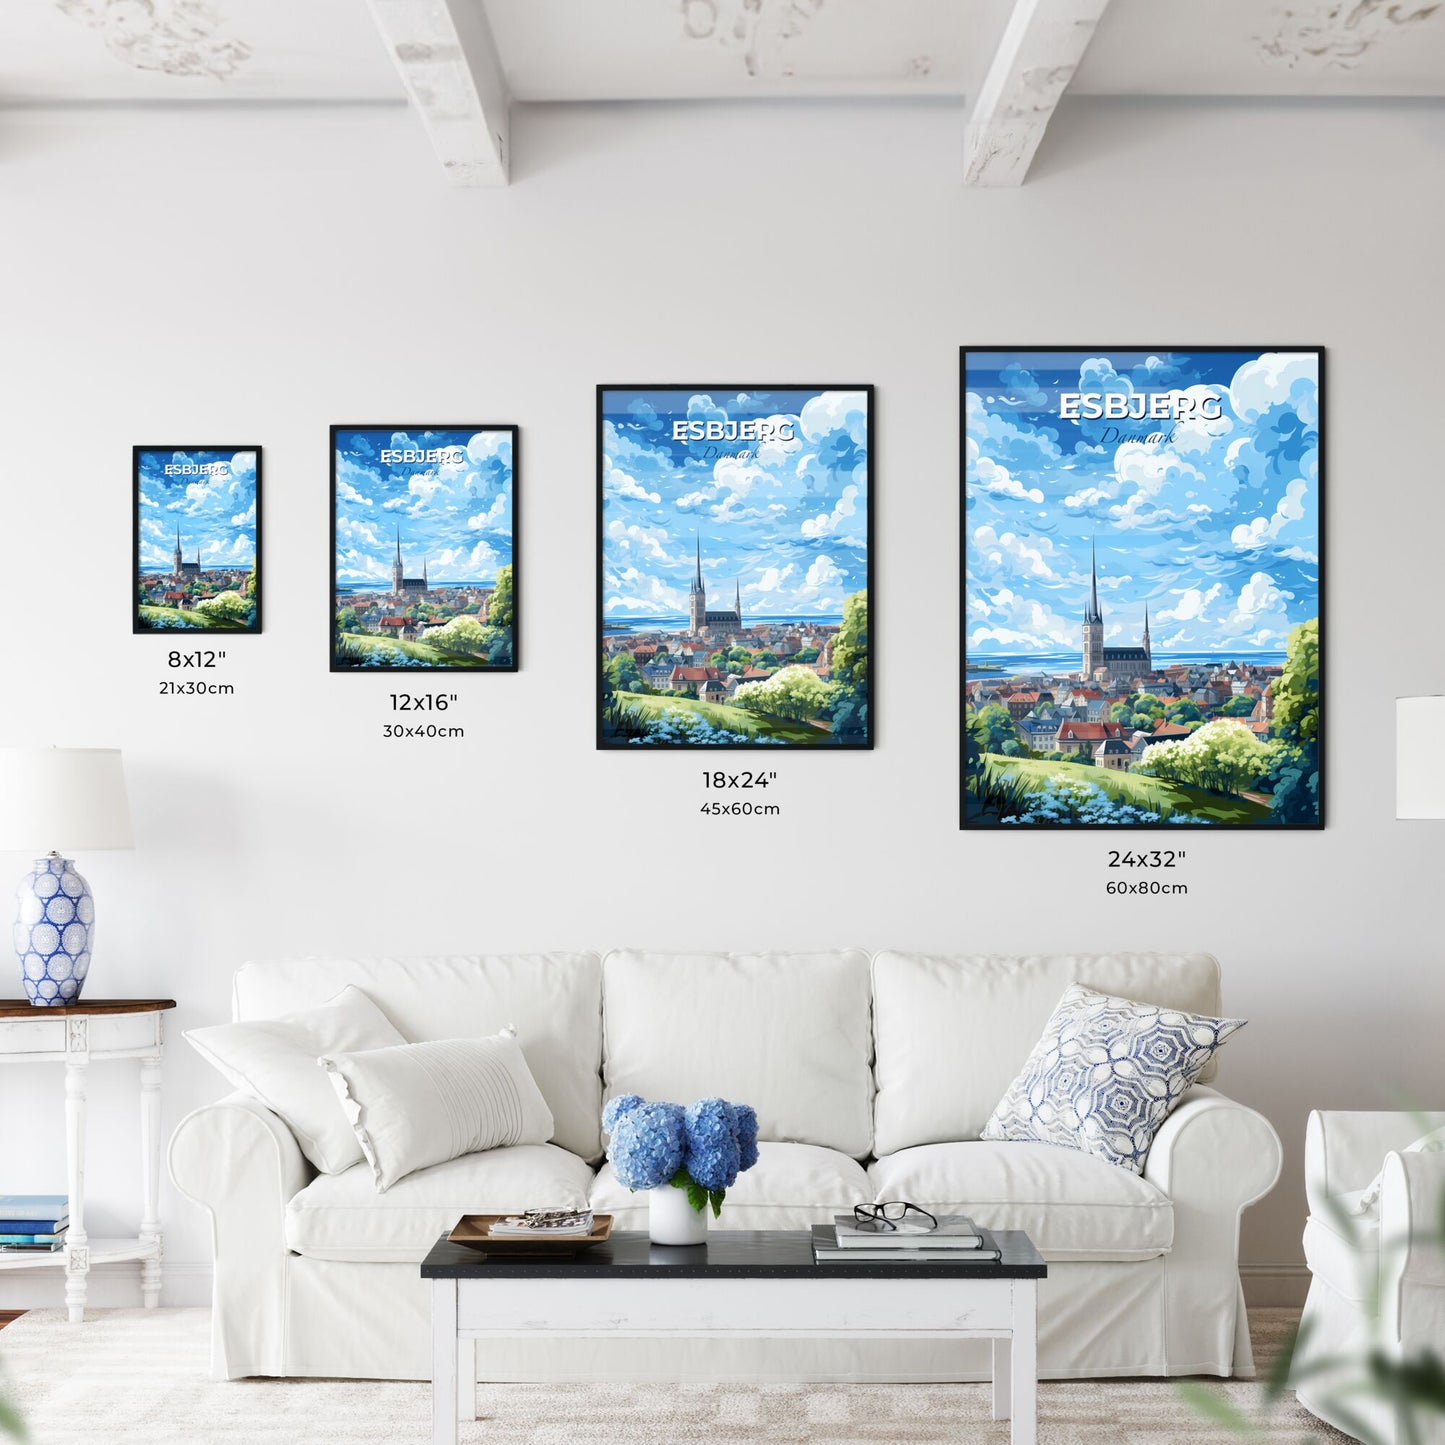 Esbjerg Danmark Skyline - A City With A Tall Spire And Trees - Customizable Travel Gift Default Title